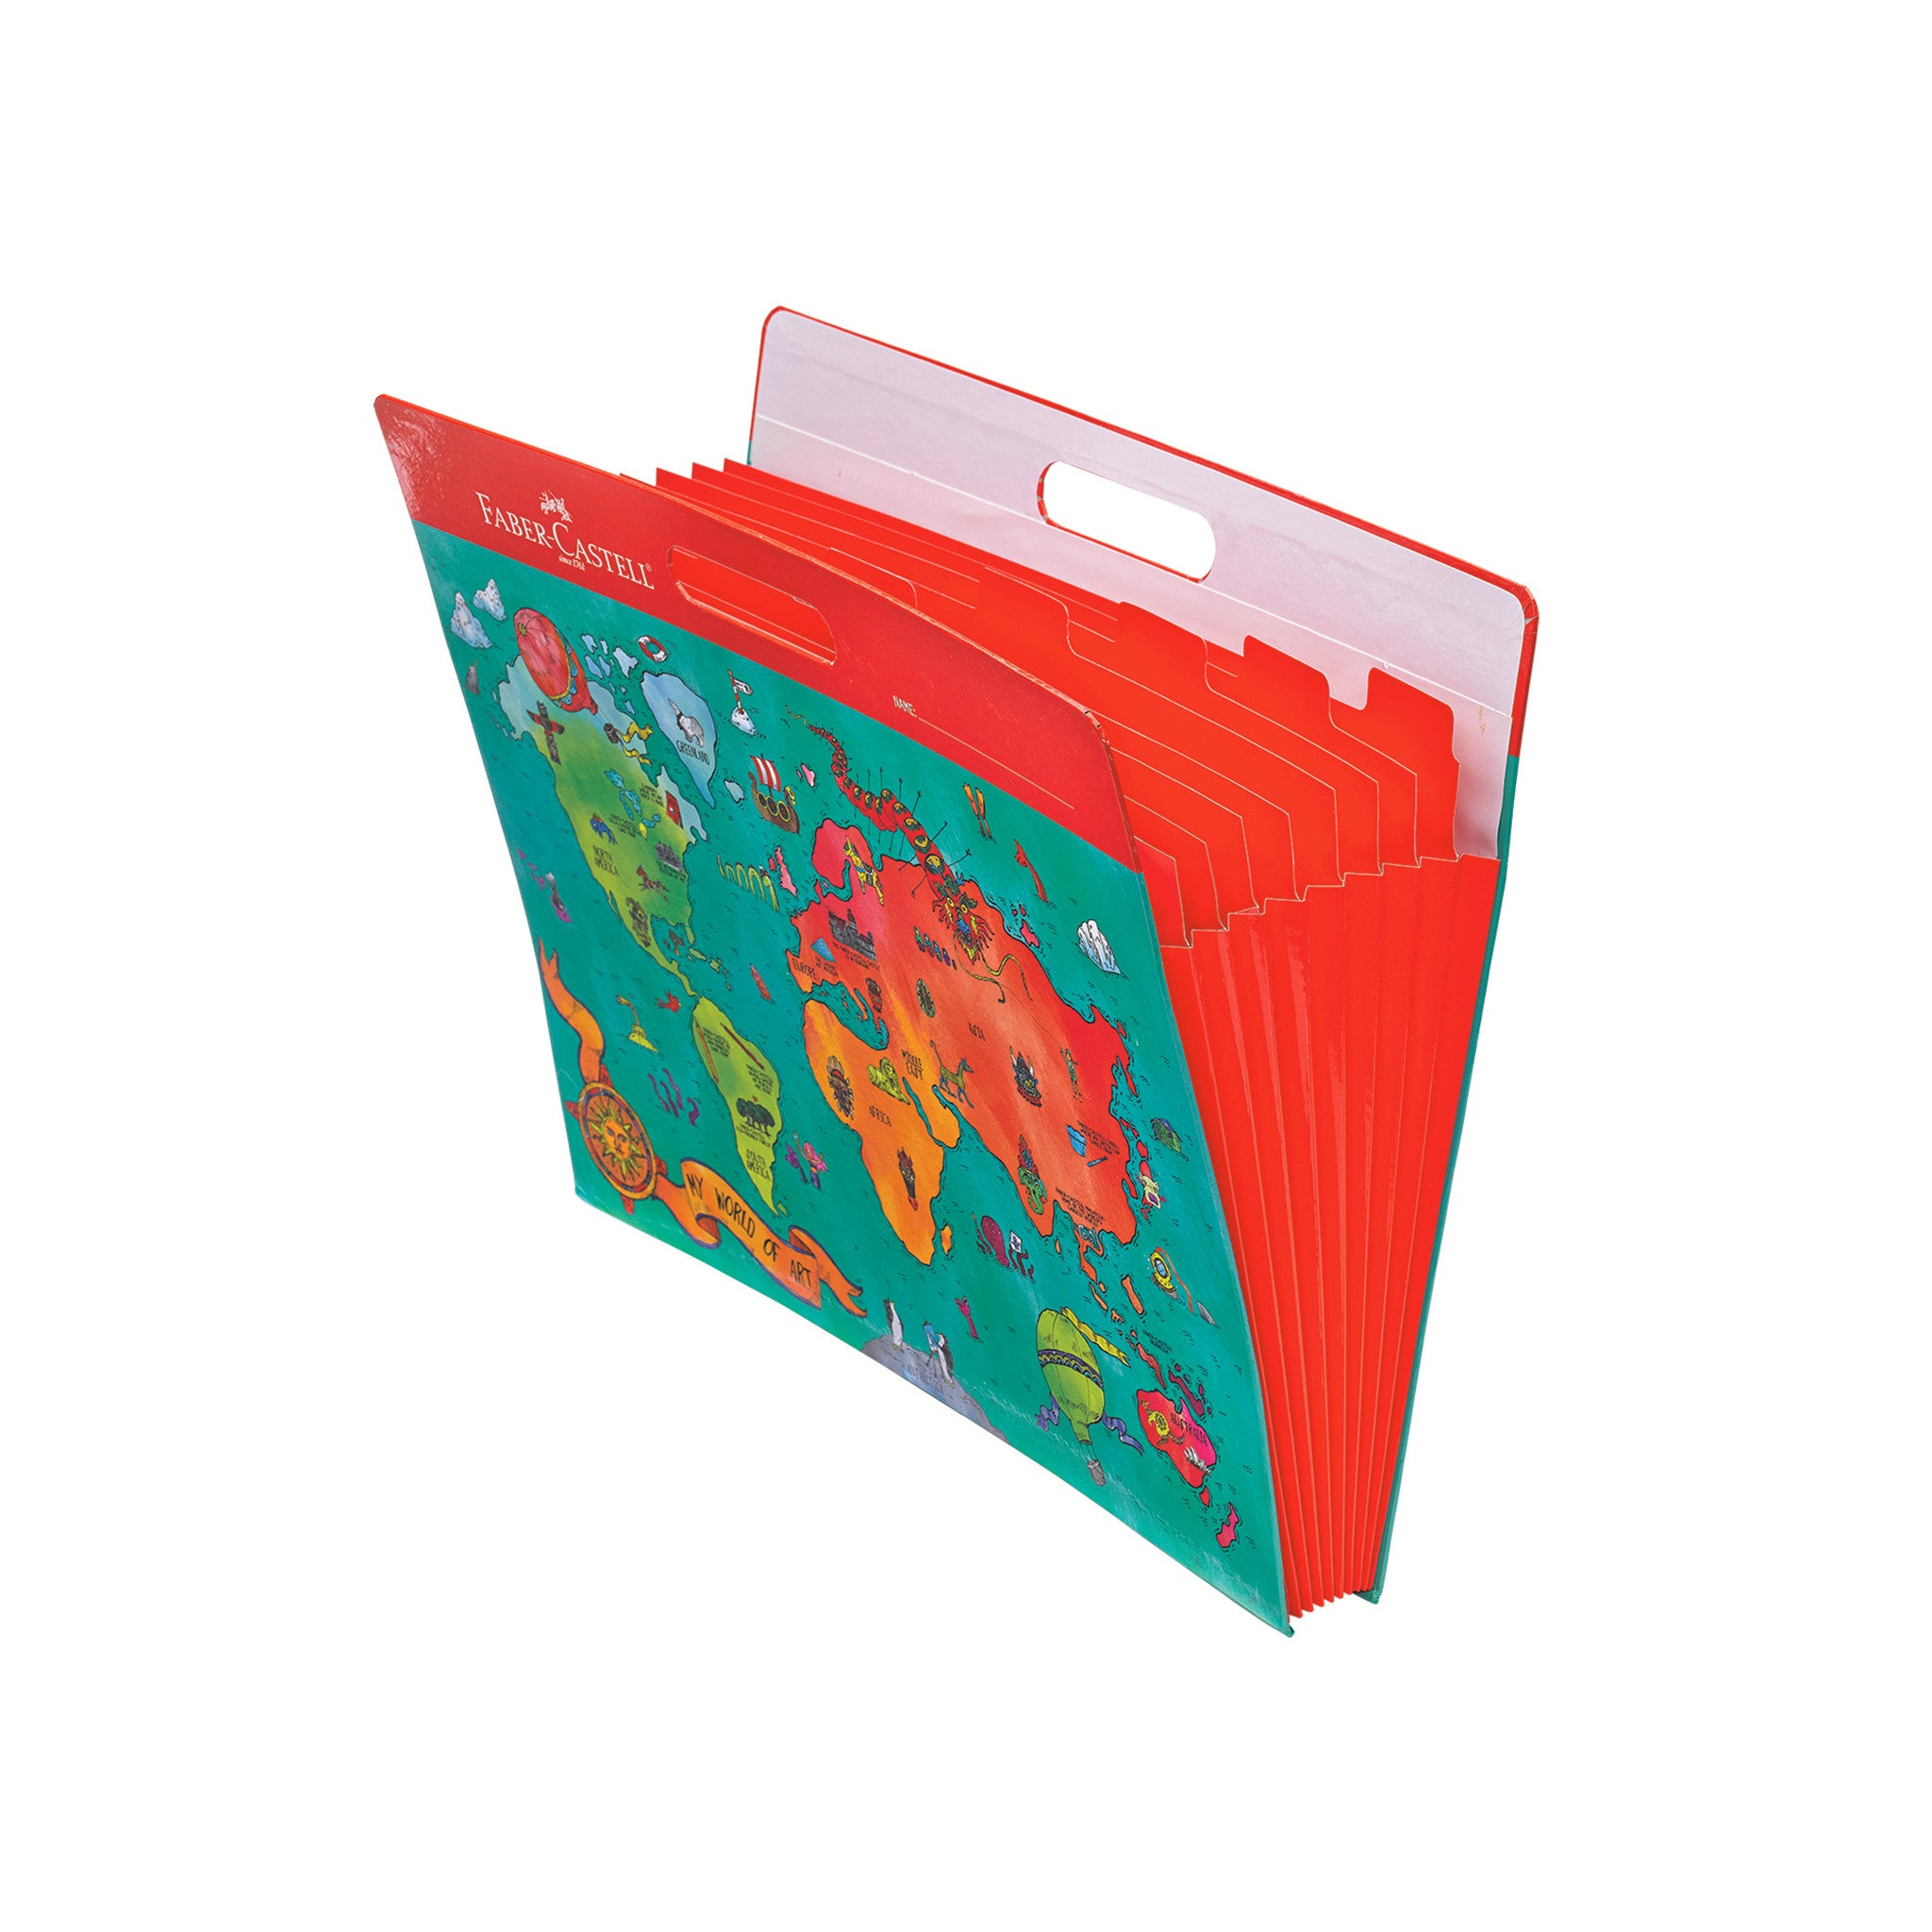  Faber-Castell My World of Art Portfolio for Kids - 8 Expandable  Folder Pockets for Kid's Artwork and Keepsakes : Arts, Crafts & Sewing